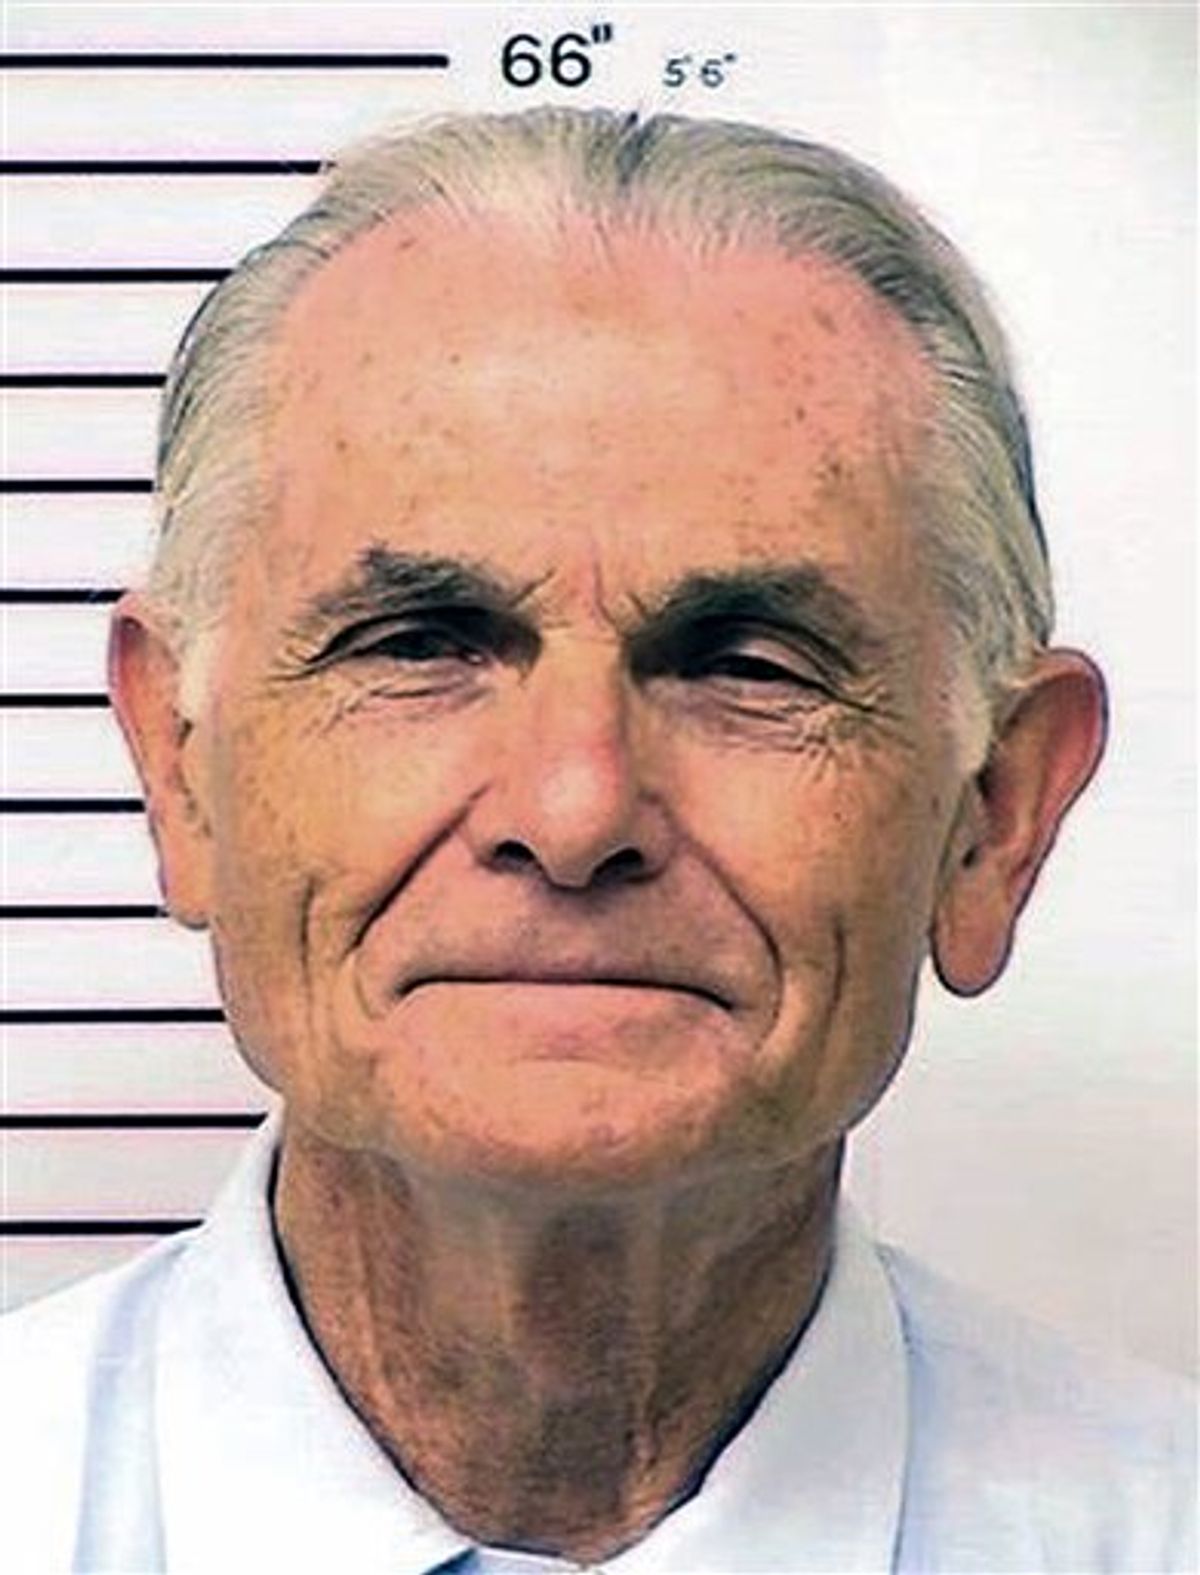 ADDITION ADDS-Gov. Jerry Brown has reversed a state parole board panel's decision to recommend parole for Davis-File-This file photo provided Jan. 29, 2013, by the California Department of Corrections shows Bruce Davis. California's governor is scheduled to approve or reject a recommendation of parole for former Charles Manson follower Davis. He has served over 40 years for two murders unrelated to the notorious Sharon Tate-LaBianca killings. (AP Photo/California Department Of Corrections,File)     (AP)